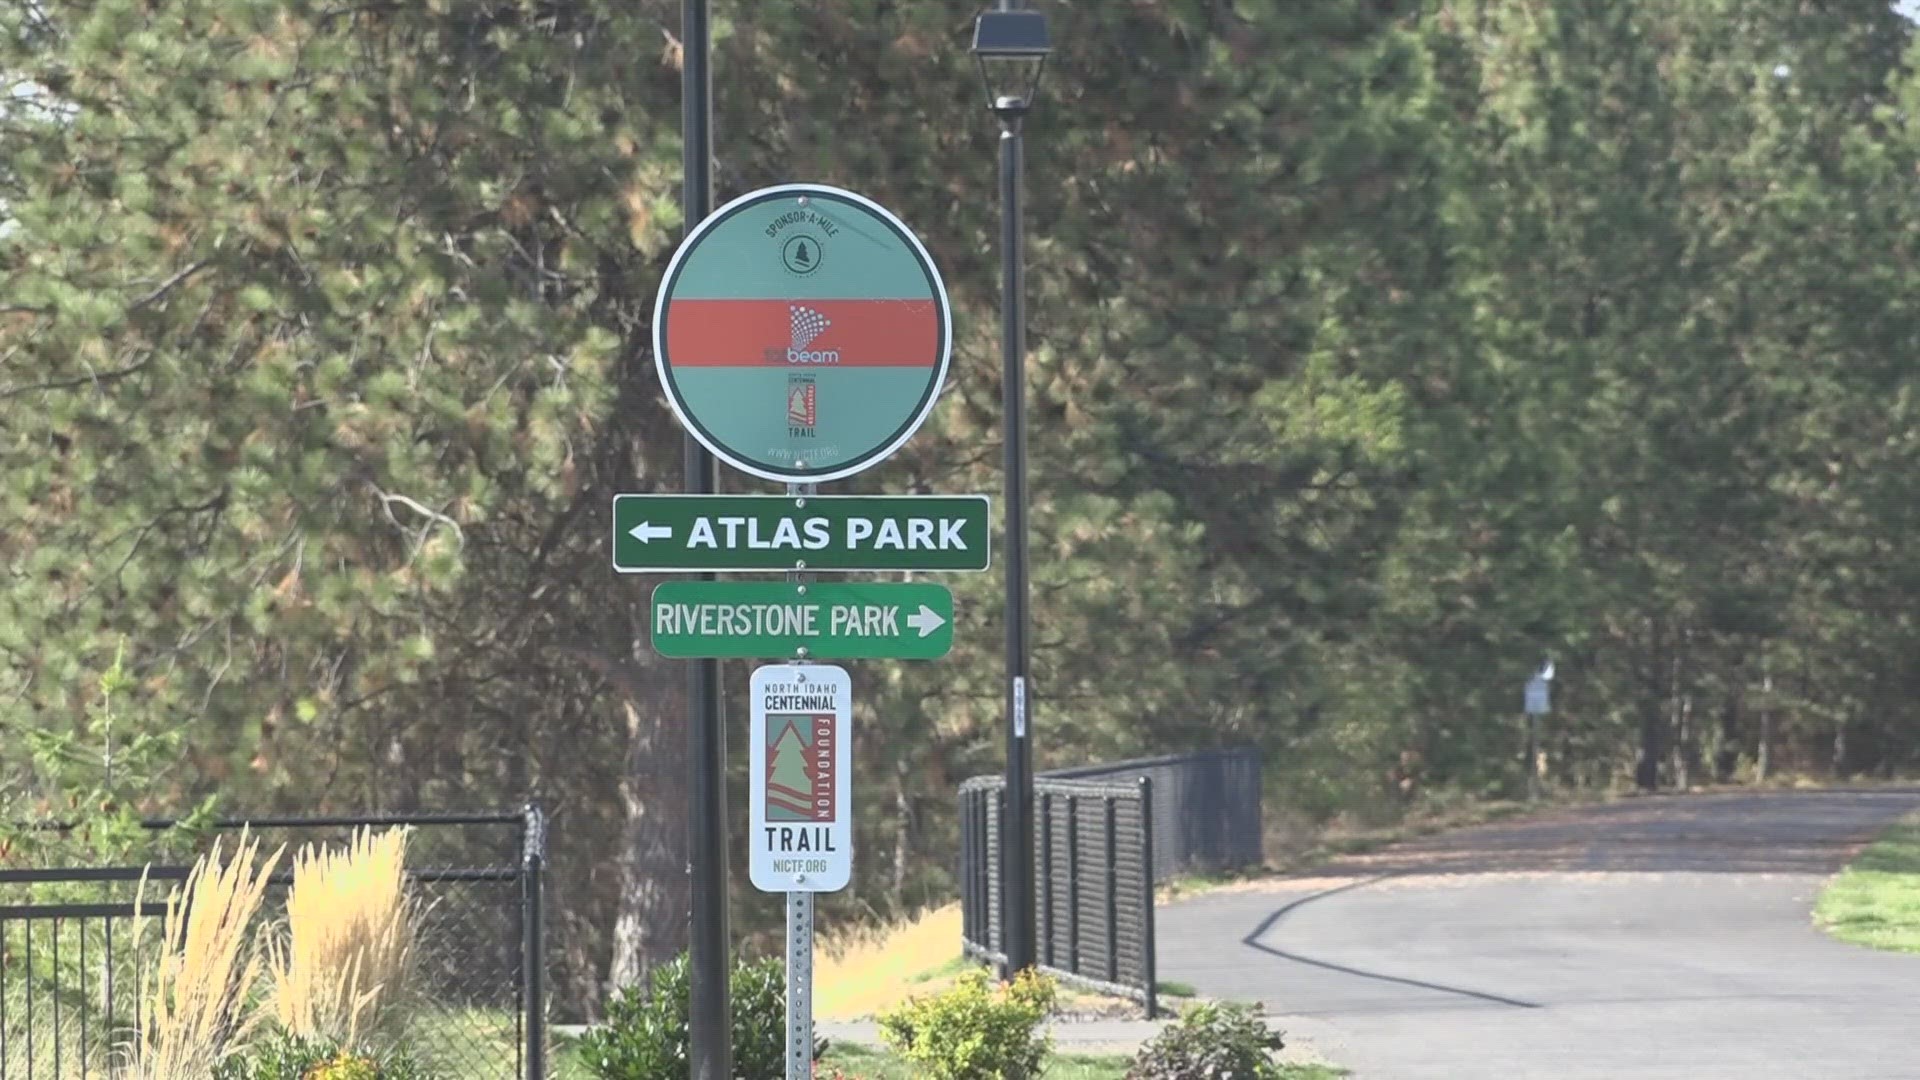 The project is expected to be done by early September, according to the Washington State Parks department.